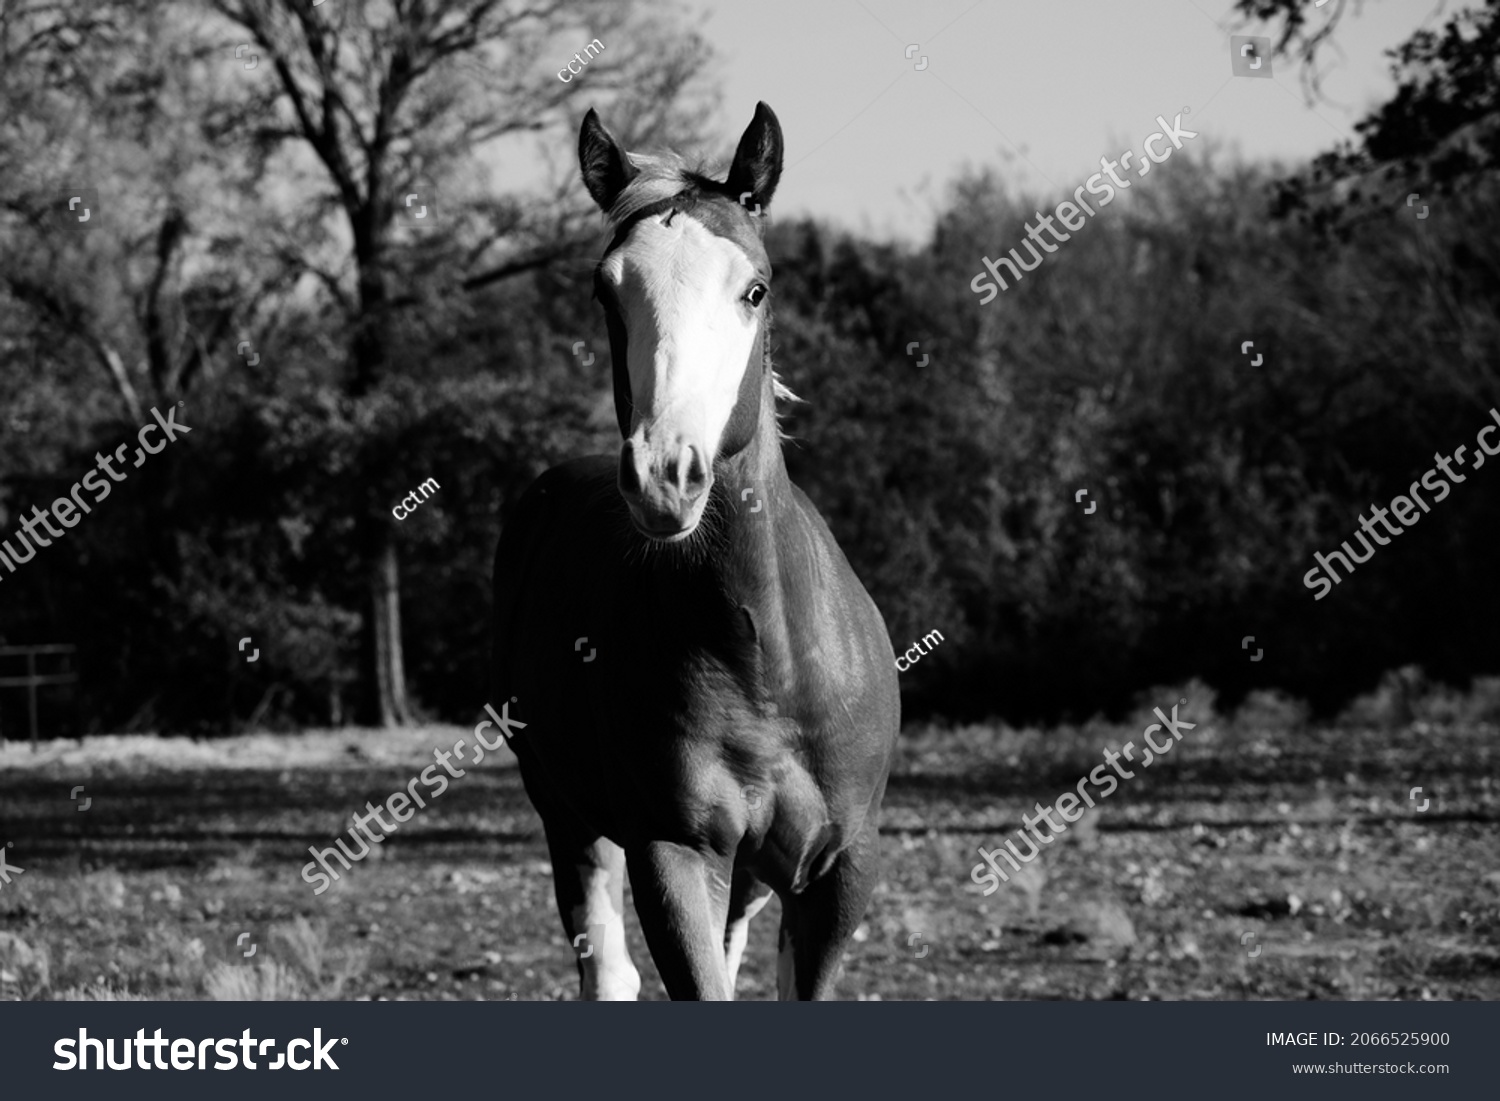 Bald face colt horse portrait in black and white from Texas farm field. #2066525900